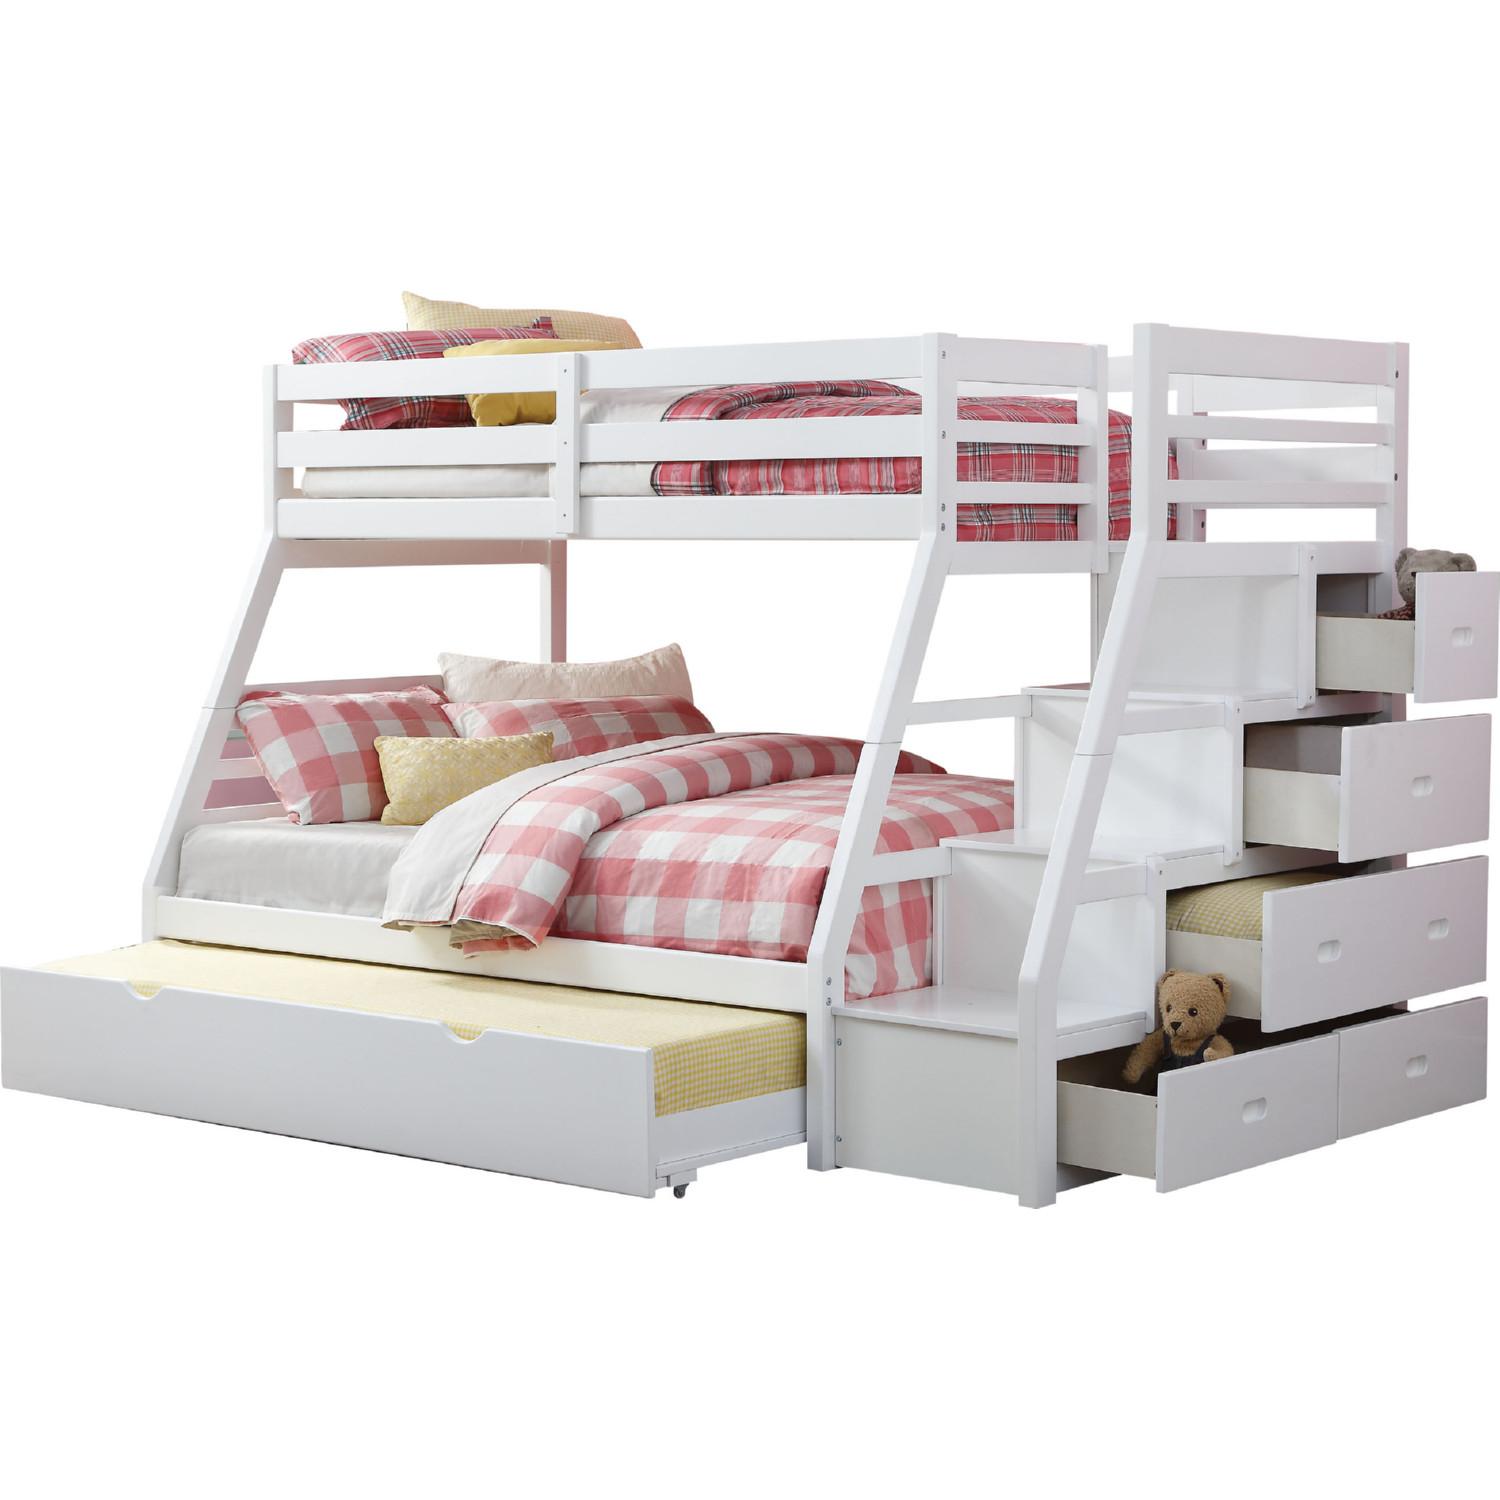 Transitional Twin/Full Bunk Bed Jason 37105 in White 